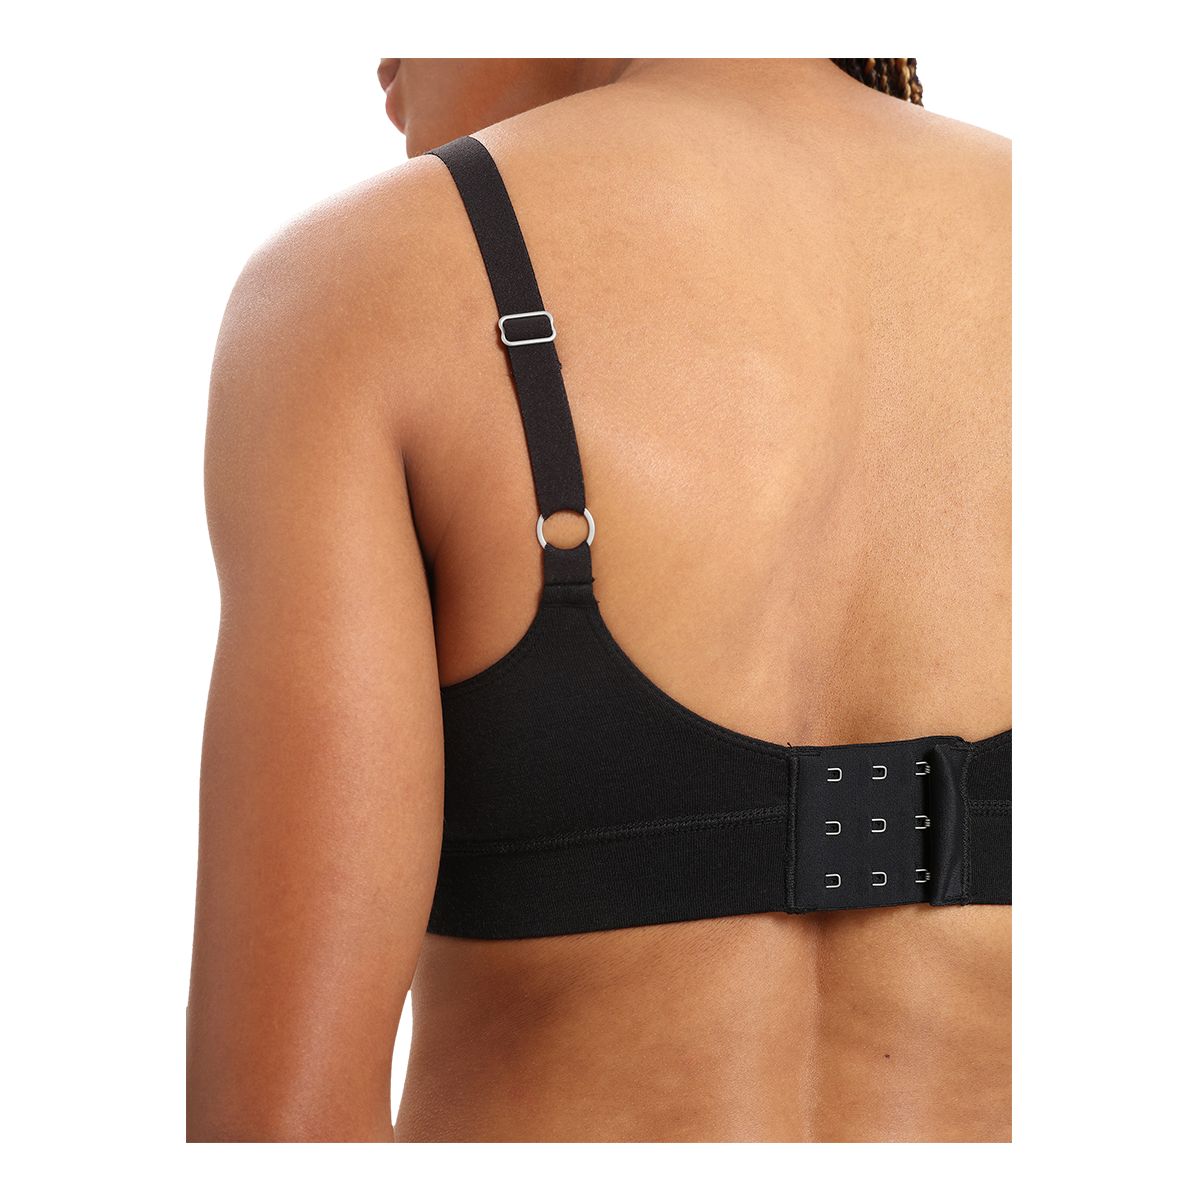 https://media-www.sportchek.ca/product/div-03-softgoods/dpt-79-clothing-accessories/sdpt-02-womens/334254430/icebreaker-women-s-queens-clasp-bra-48bffb1c-395a-4768-bfbd-c441a353b5bd-jpgrendition.jpg?imdensity=1&imwidth=1244&impolicy=mZoom